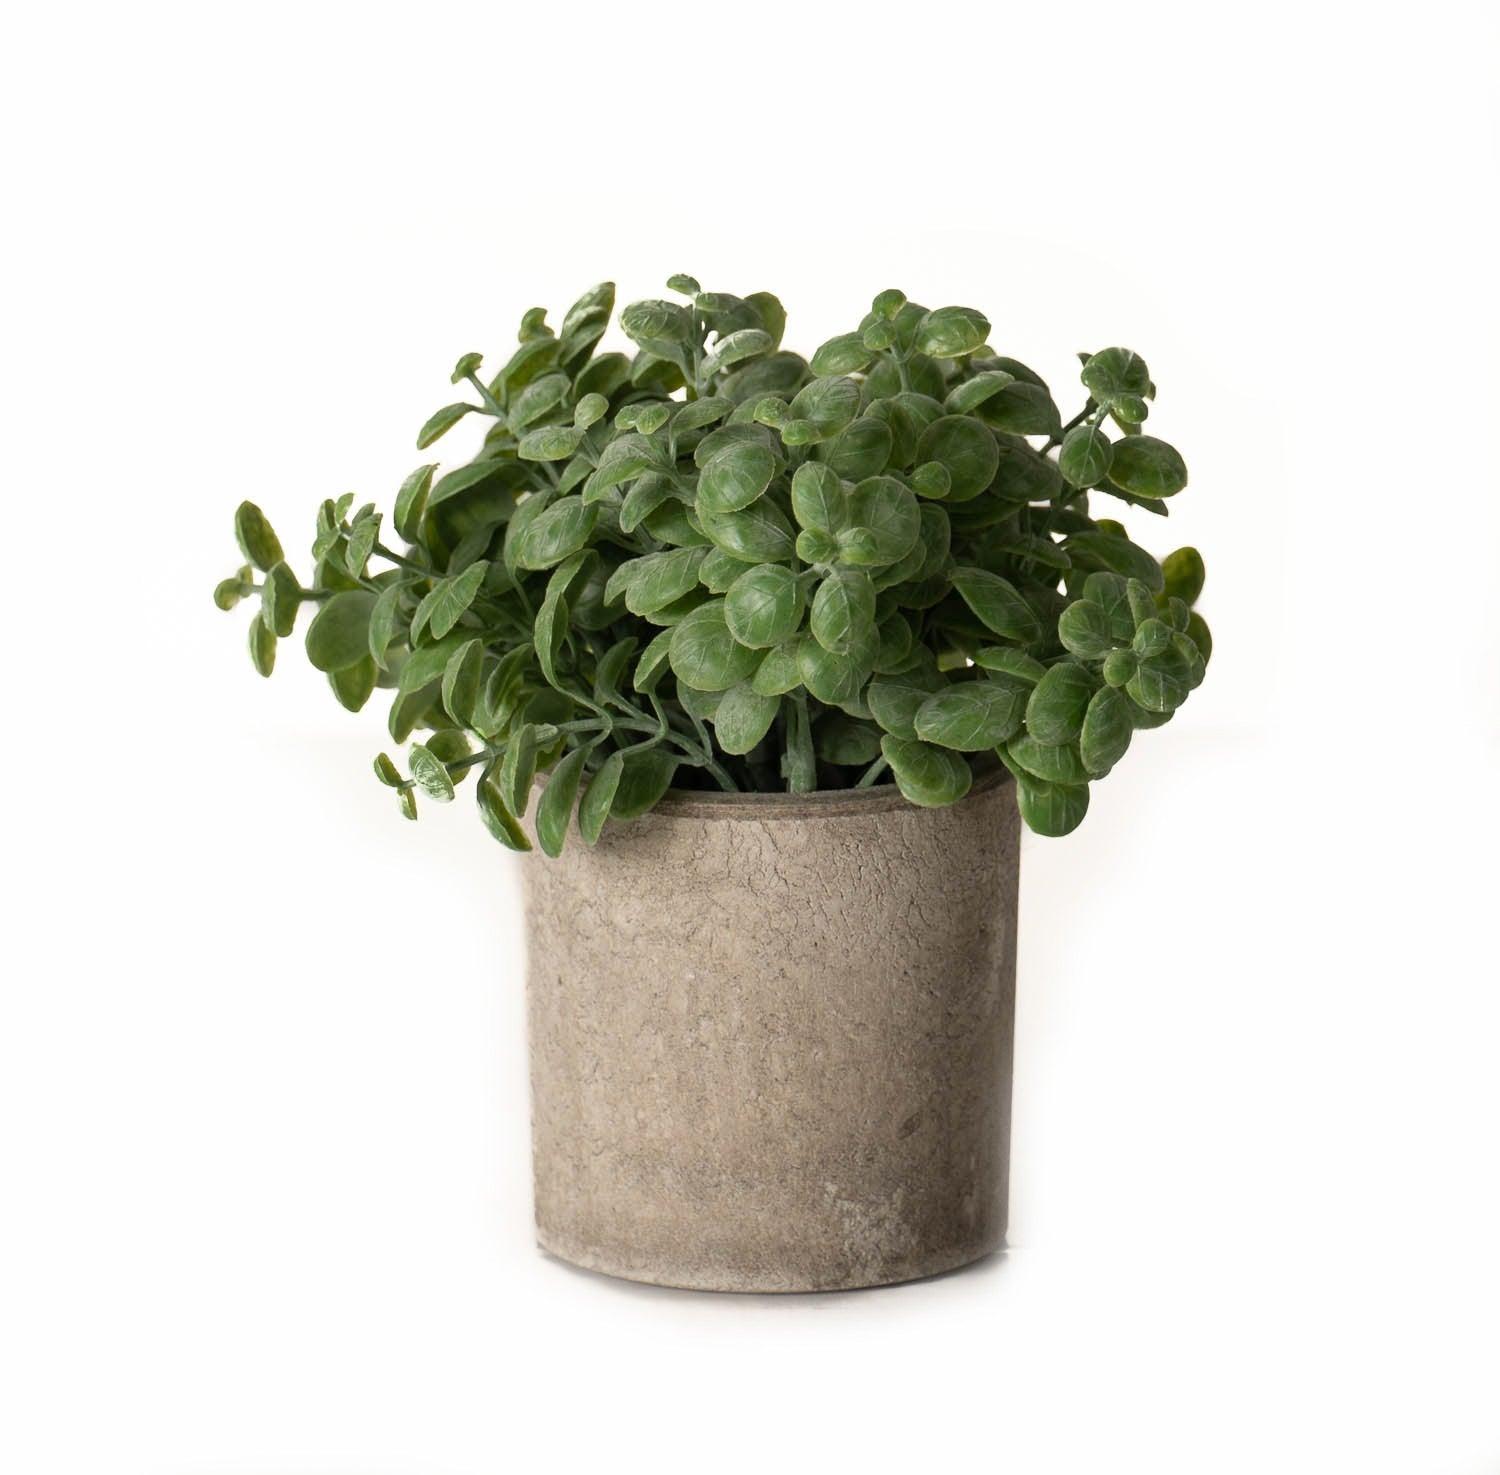 Basil Plant In Stone Effect Pot - £22.95 - Gifts & Accessories > All Artificial Potted Plants > Ornaments 